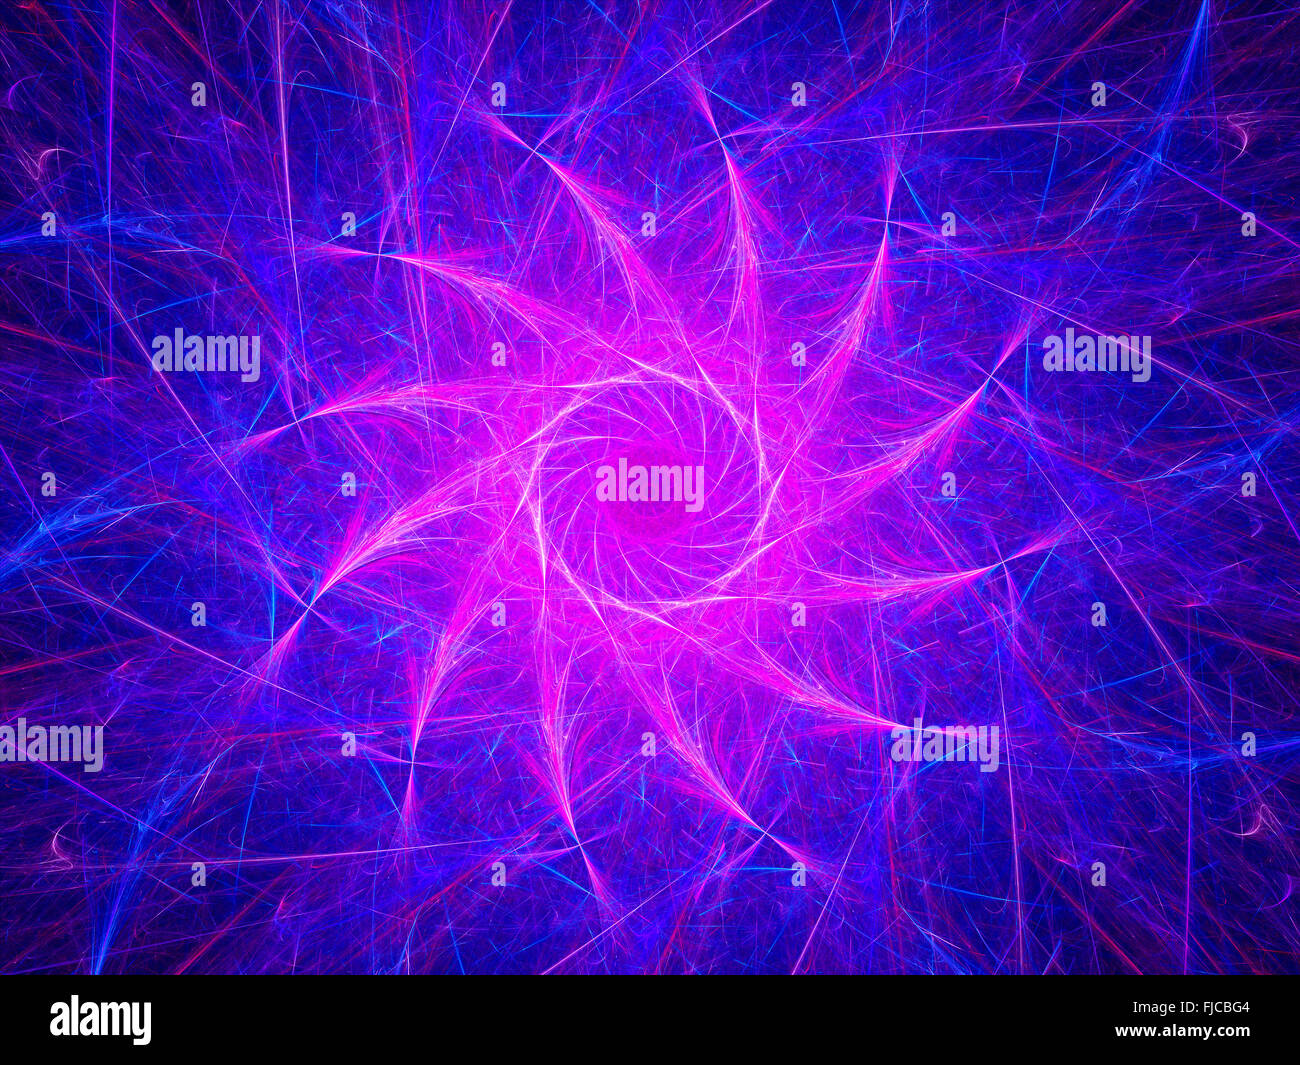 Purple abstract spiral object, computer generated abstract background Stock Photo